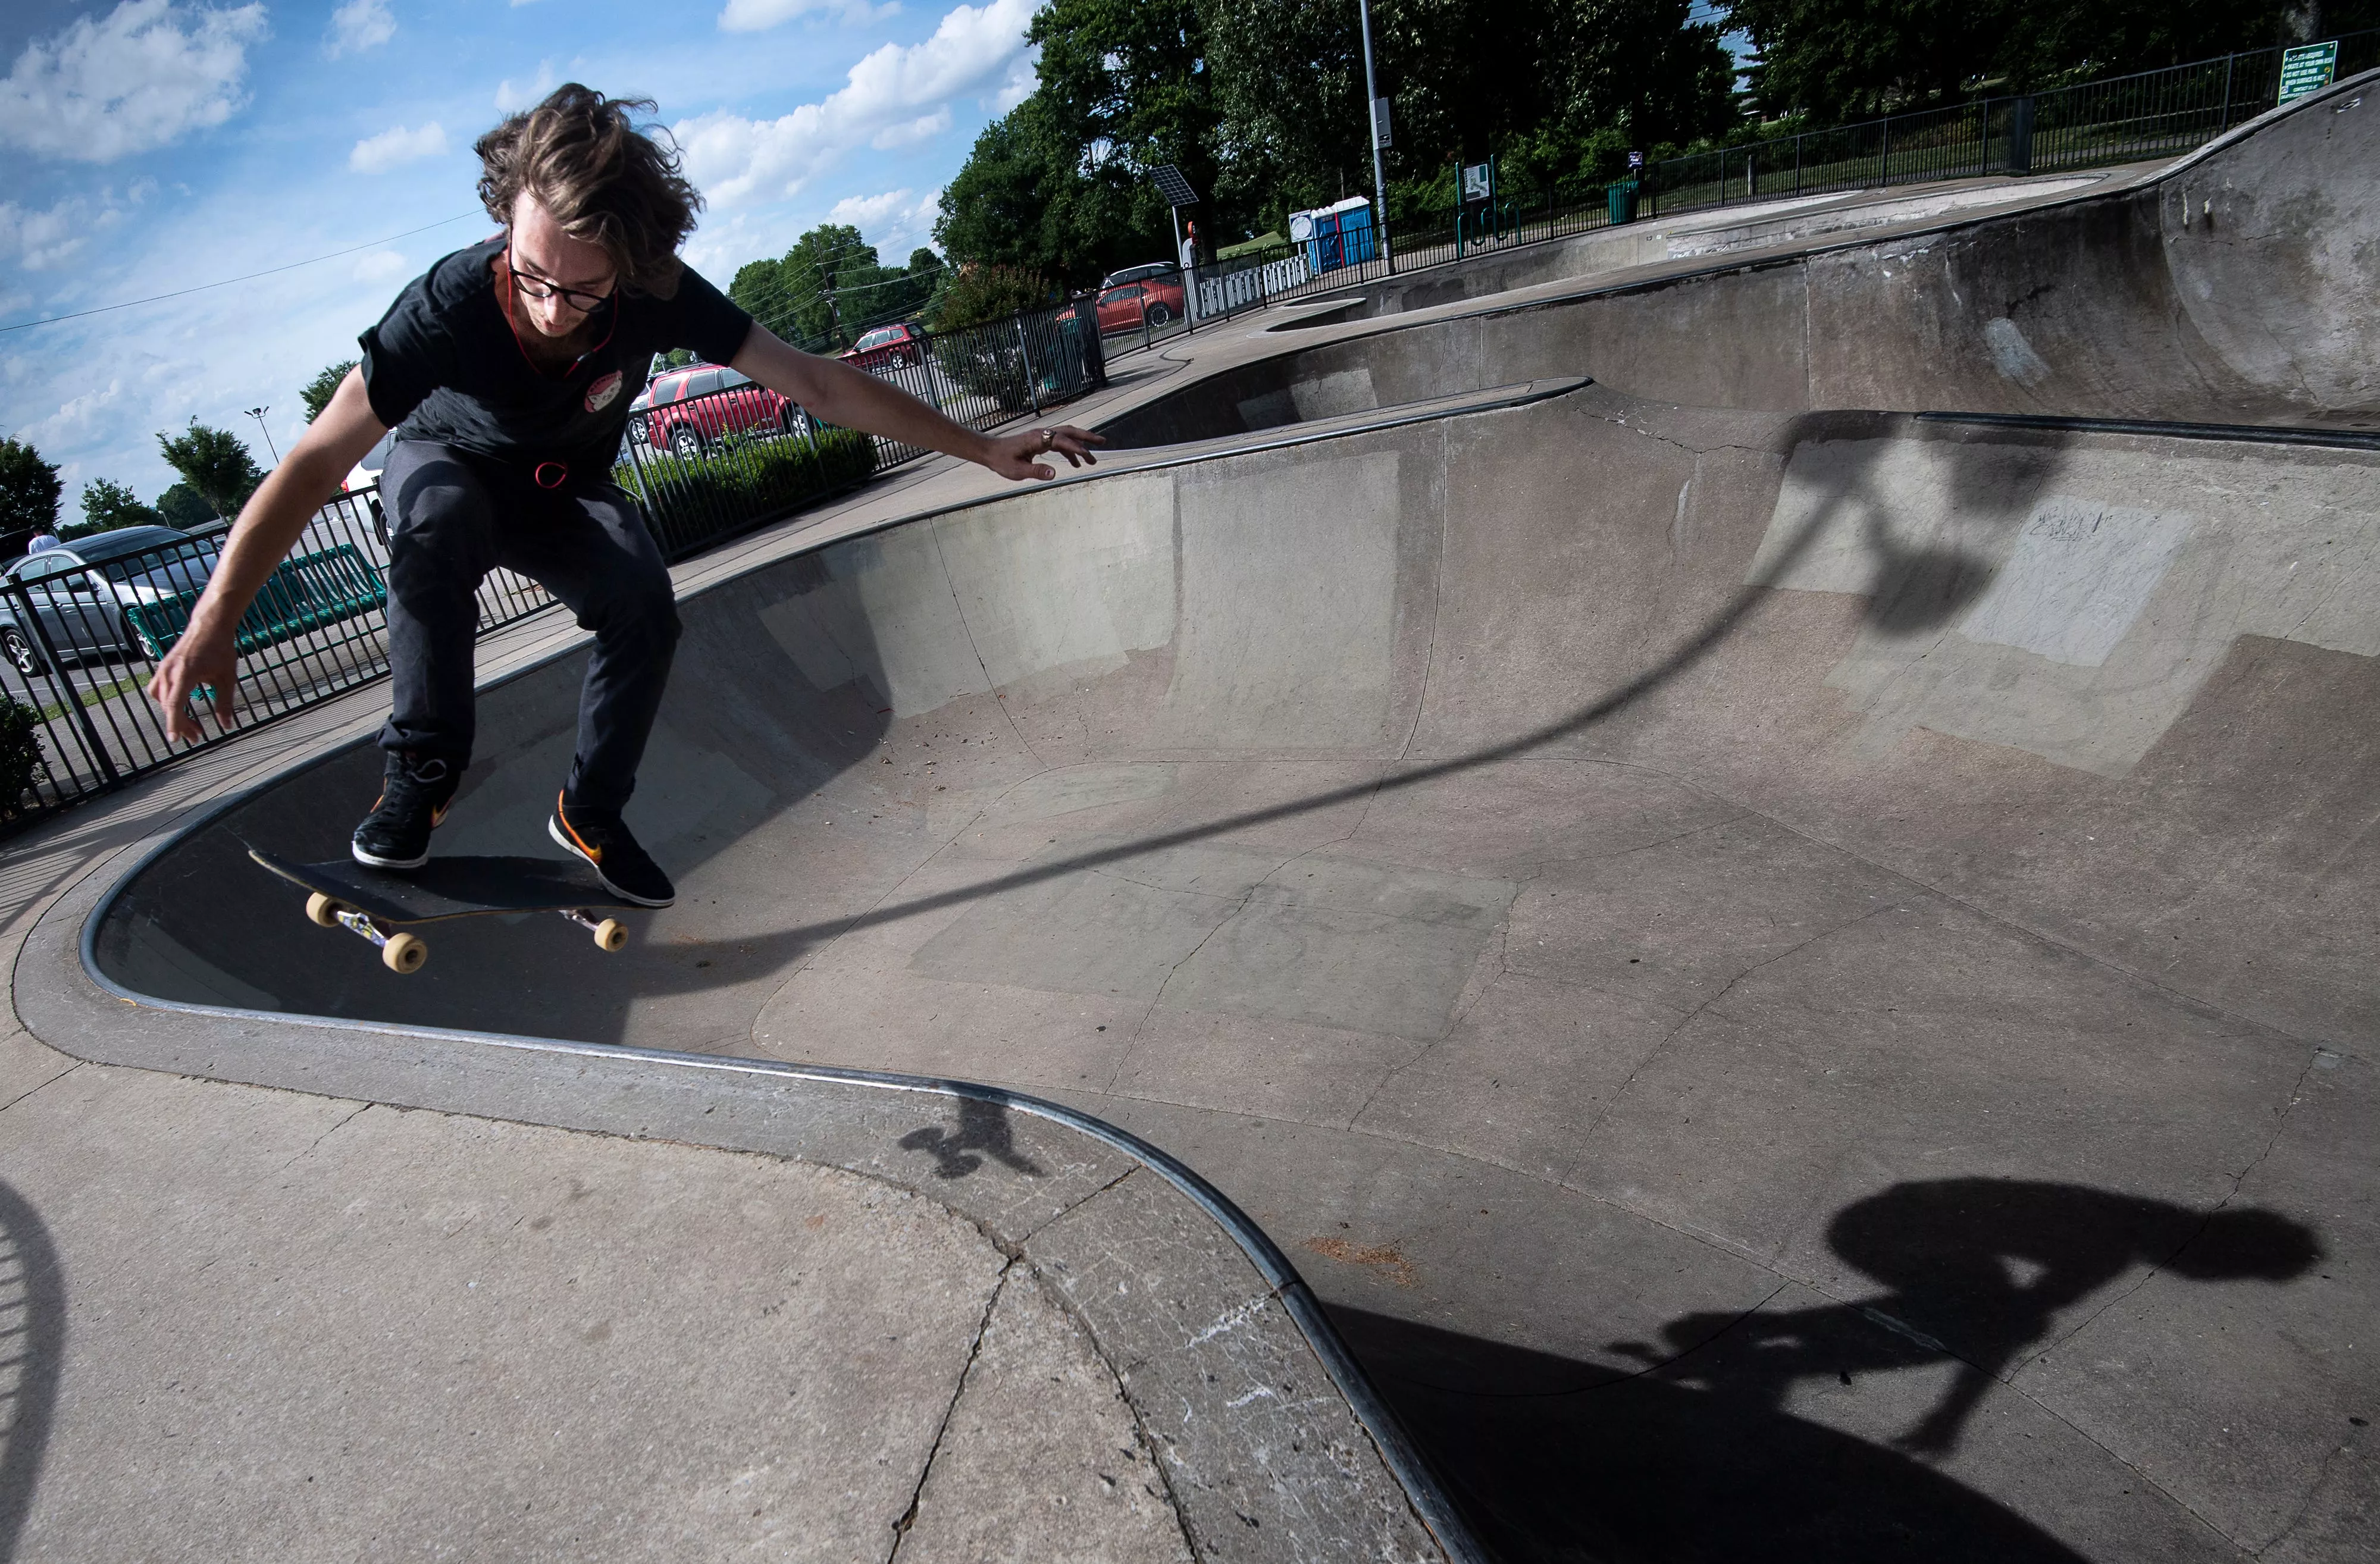 The Level in United Kingdom, Europe | Skateboarding - Rated 0.7